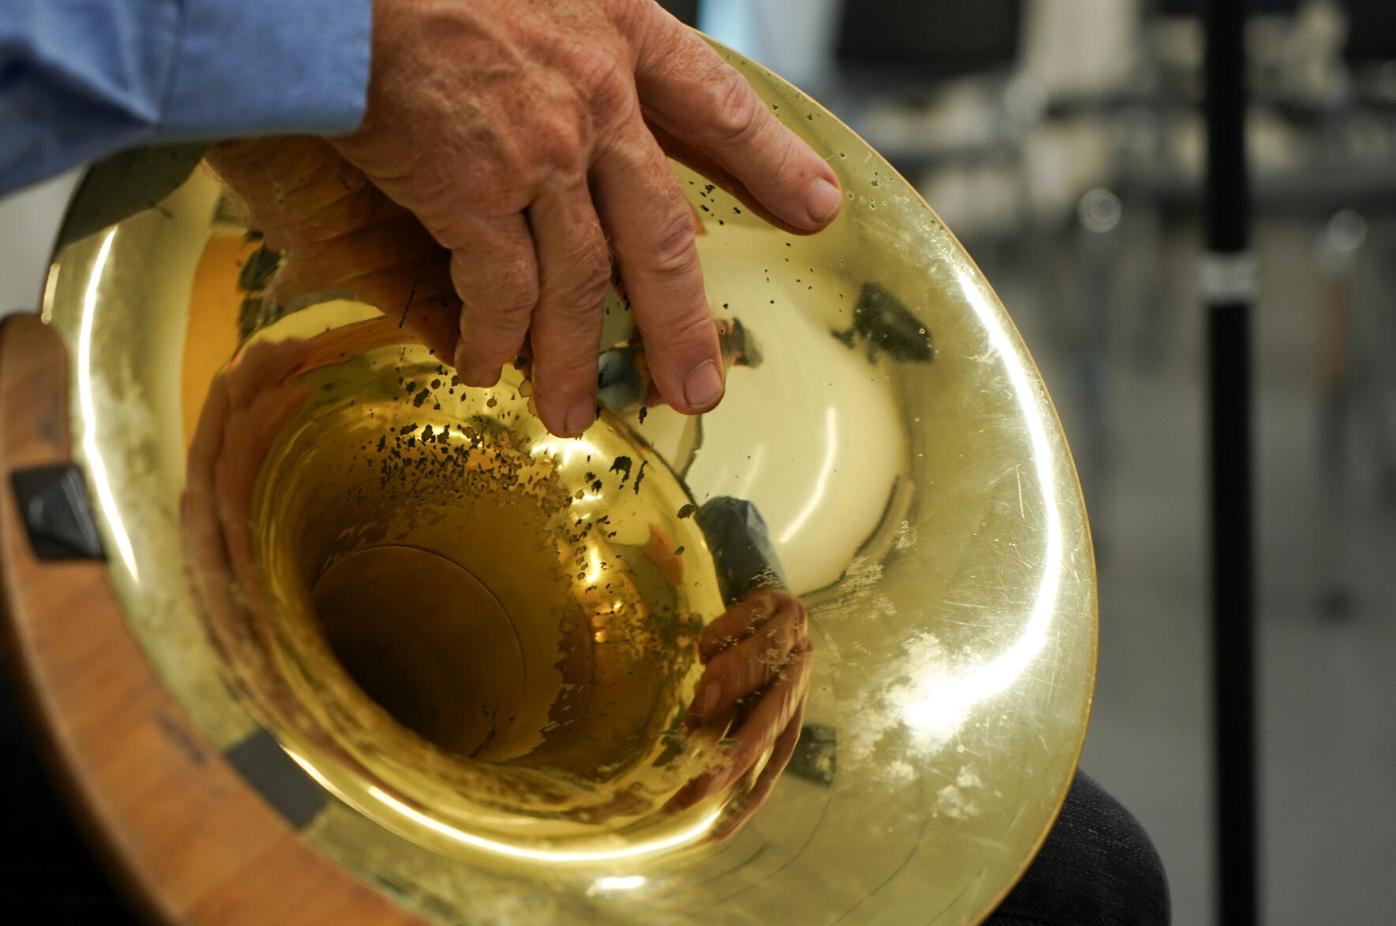 Roger Kaza grips the bell of his French horn